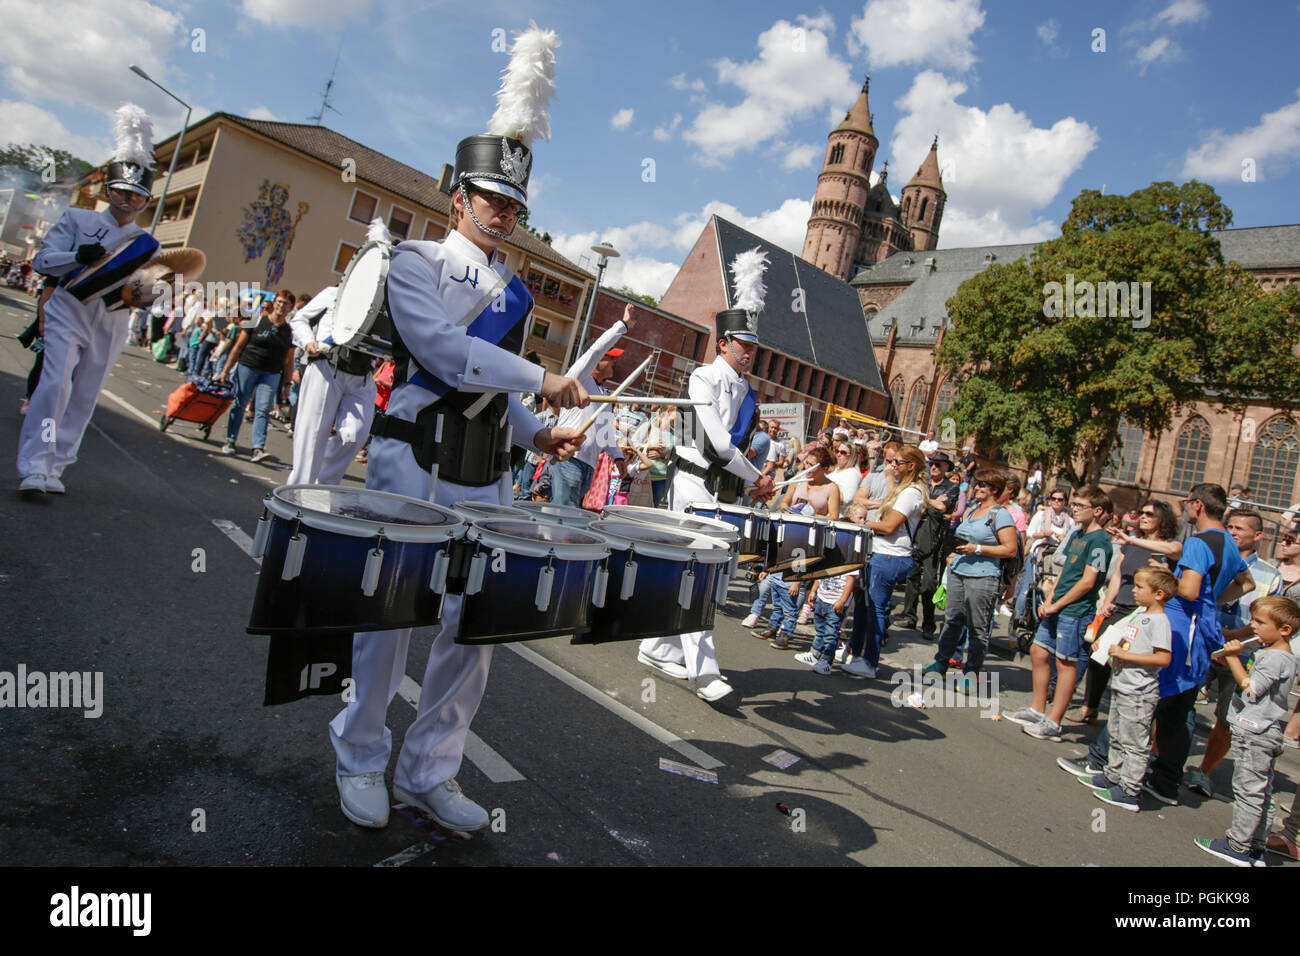 Worms, Germany. 26th Aug, 2018. The Heartliner marching band from Ludwigshafen marches in the parade. The first highlight of the 2018 Backfischfest was the big parade through the city of Worms with over 70 groups and floats. Community groups, music groups and businesses from Worms and further afield took part. Credit: Michael Debets/Pacific Press/Alamy Live News Stock Photo